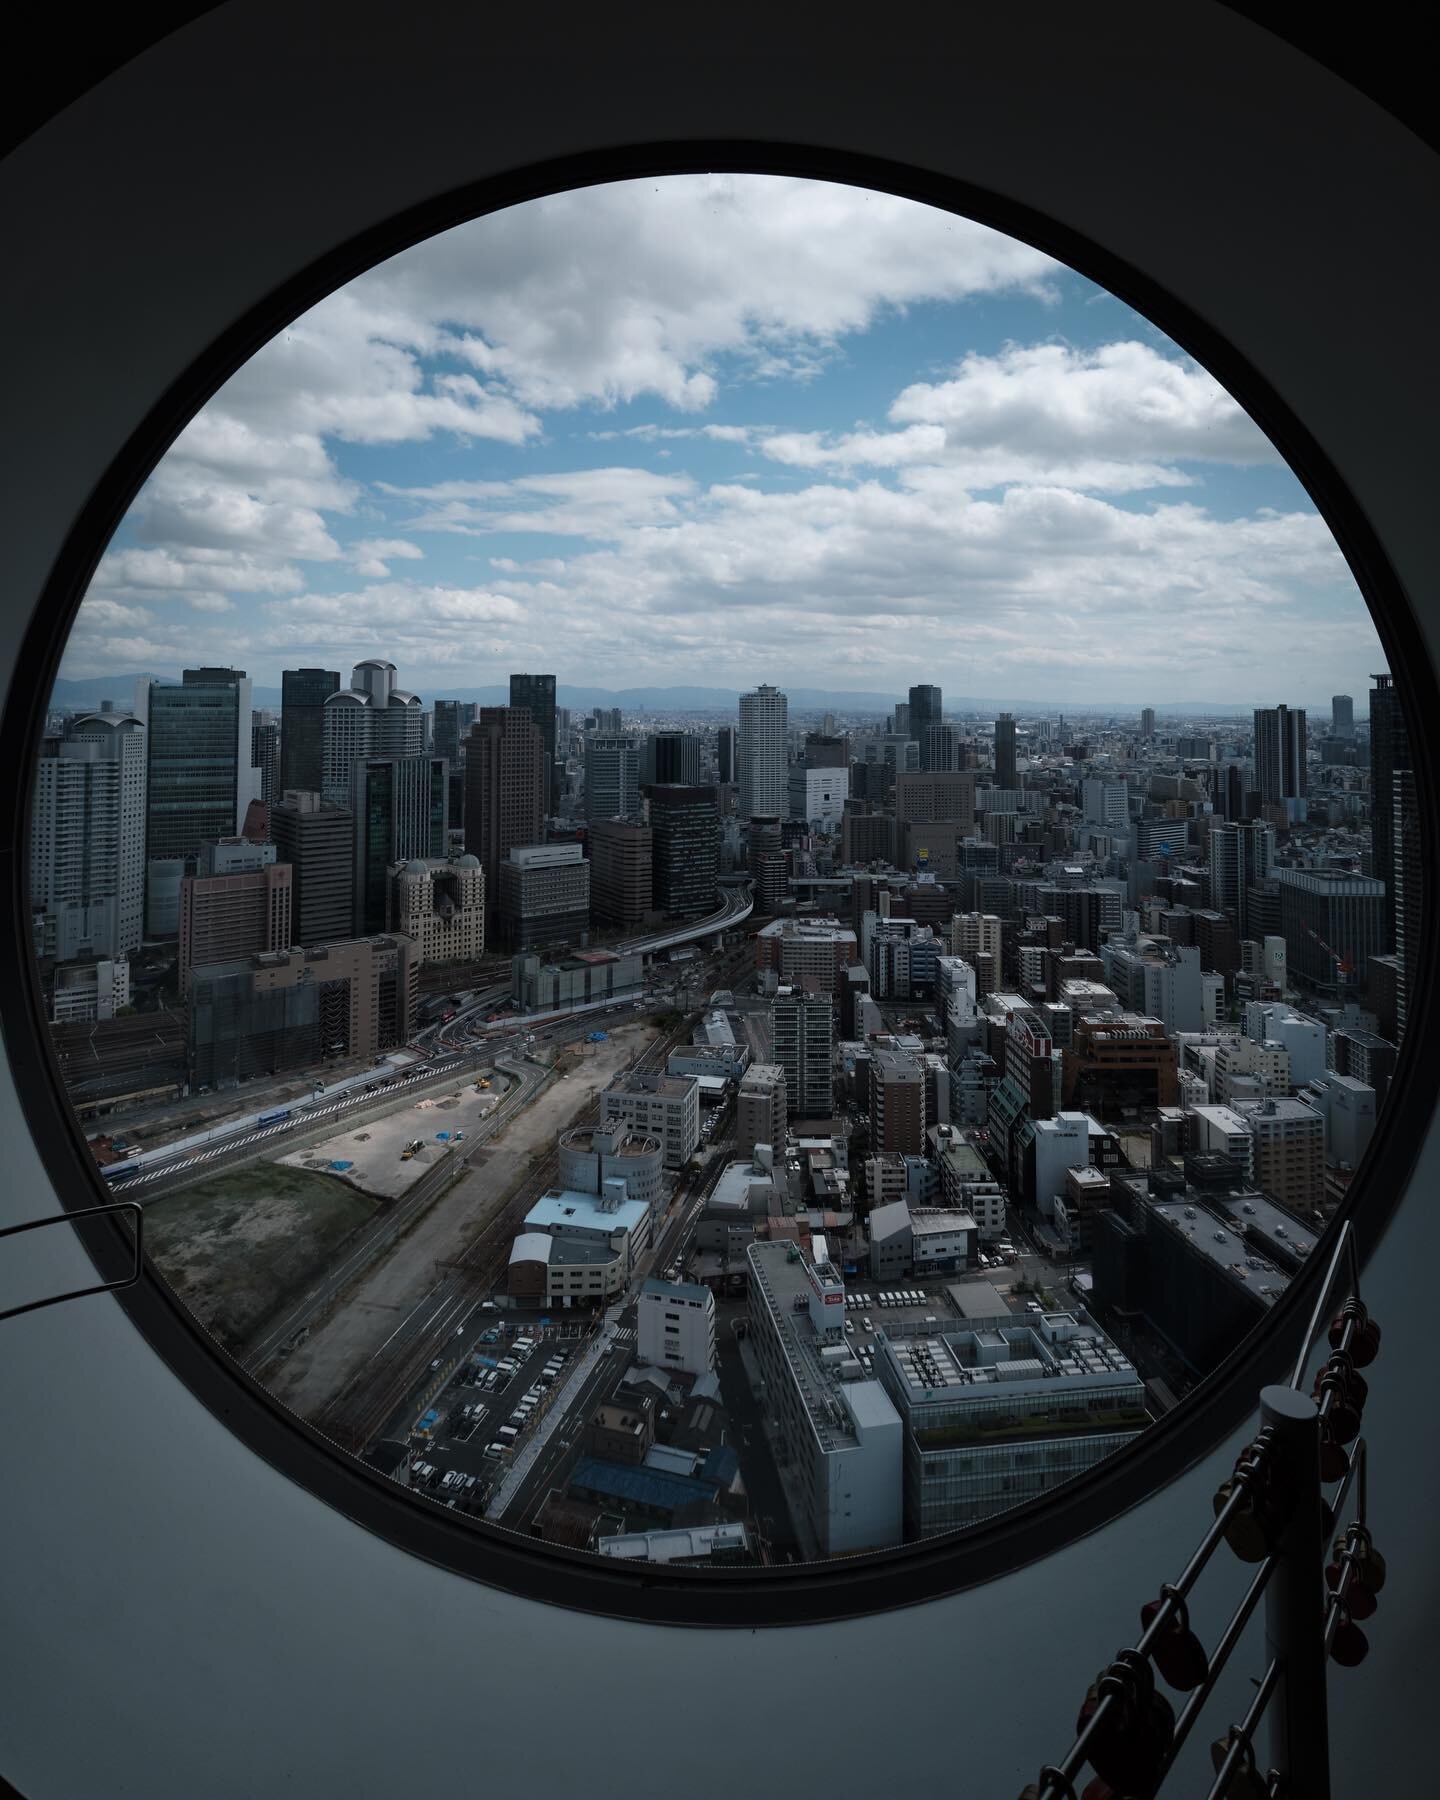 &ldquo;Window to the World&rdquo;⁣
⁣
The Umeda Sky Building in Osaka offers many sprawling city views but I think this one has the most unique perspective of the city.